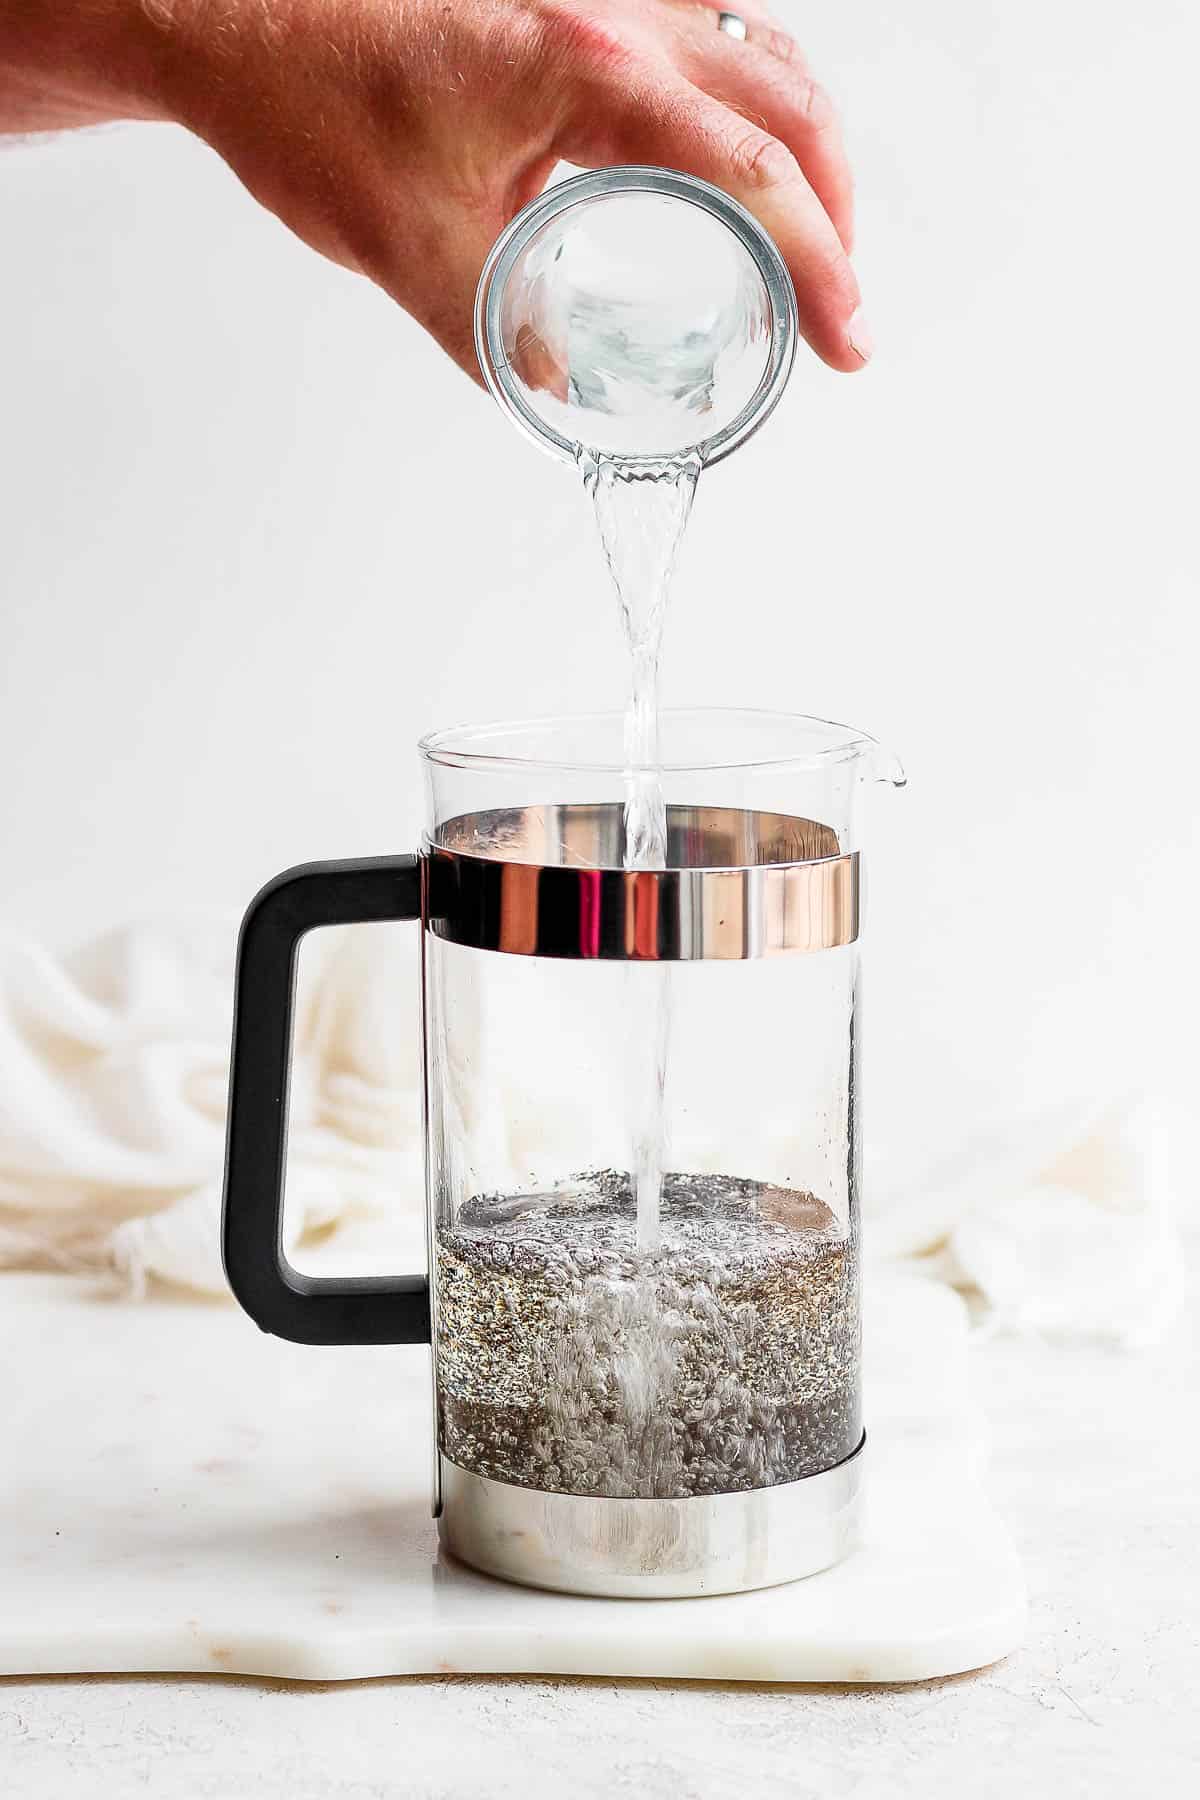 Water being poured into a french press.